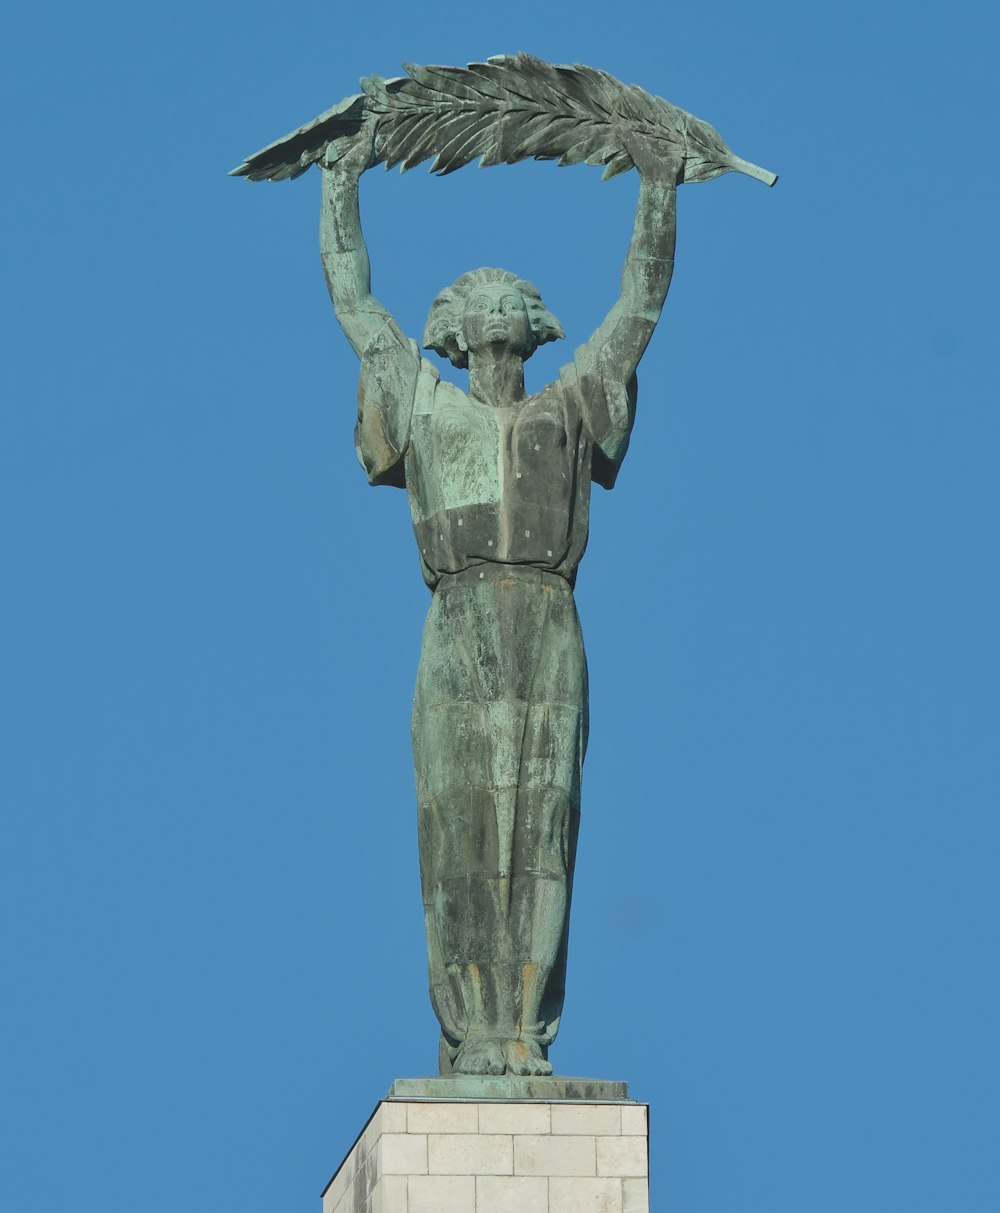 a statue of a woman holding a bird on top of her head